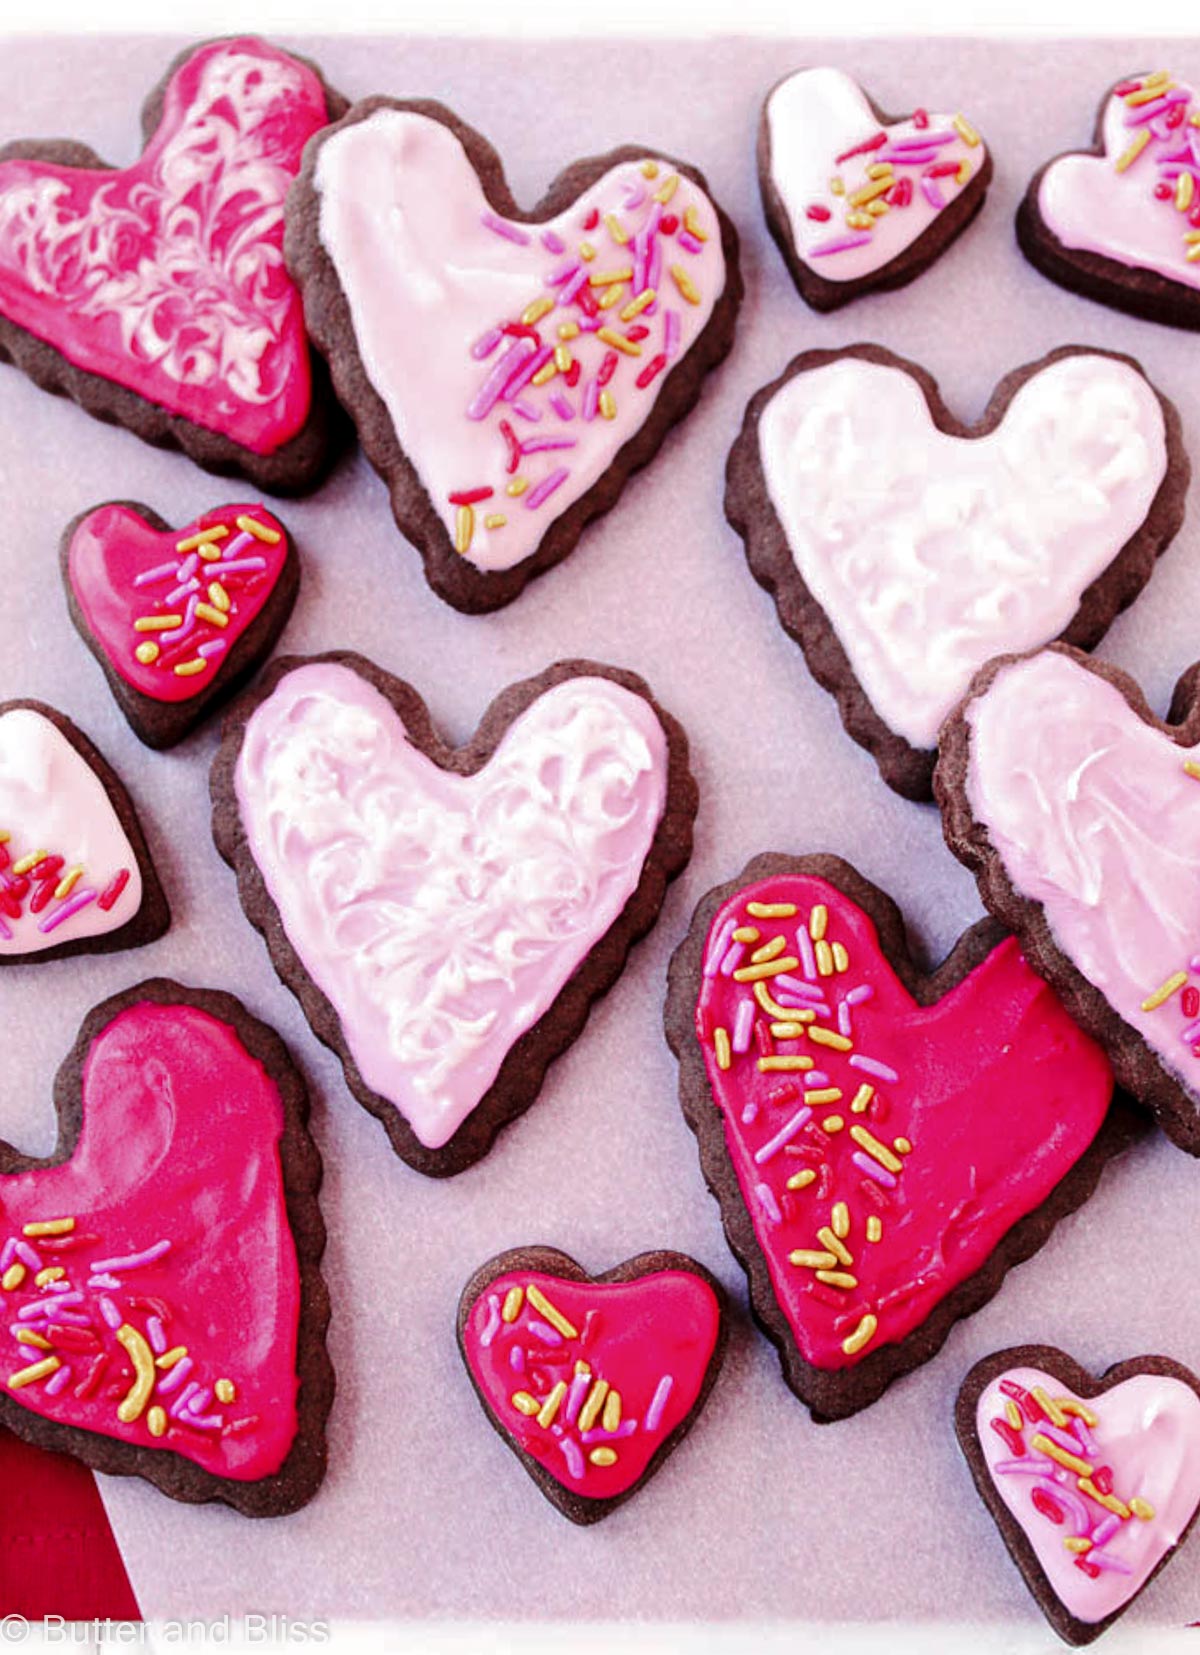 Chocolate sour cream sugar cookies cut in the shape of hearts and frosted on a piece of parchment paper.